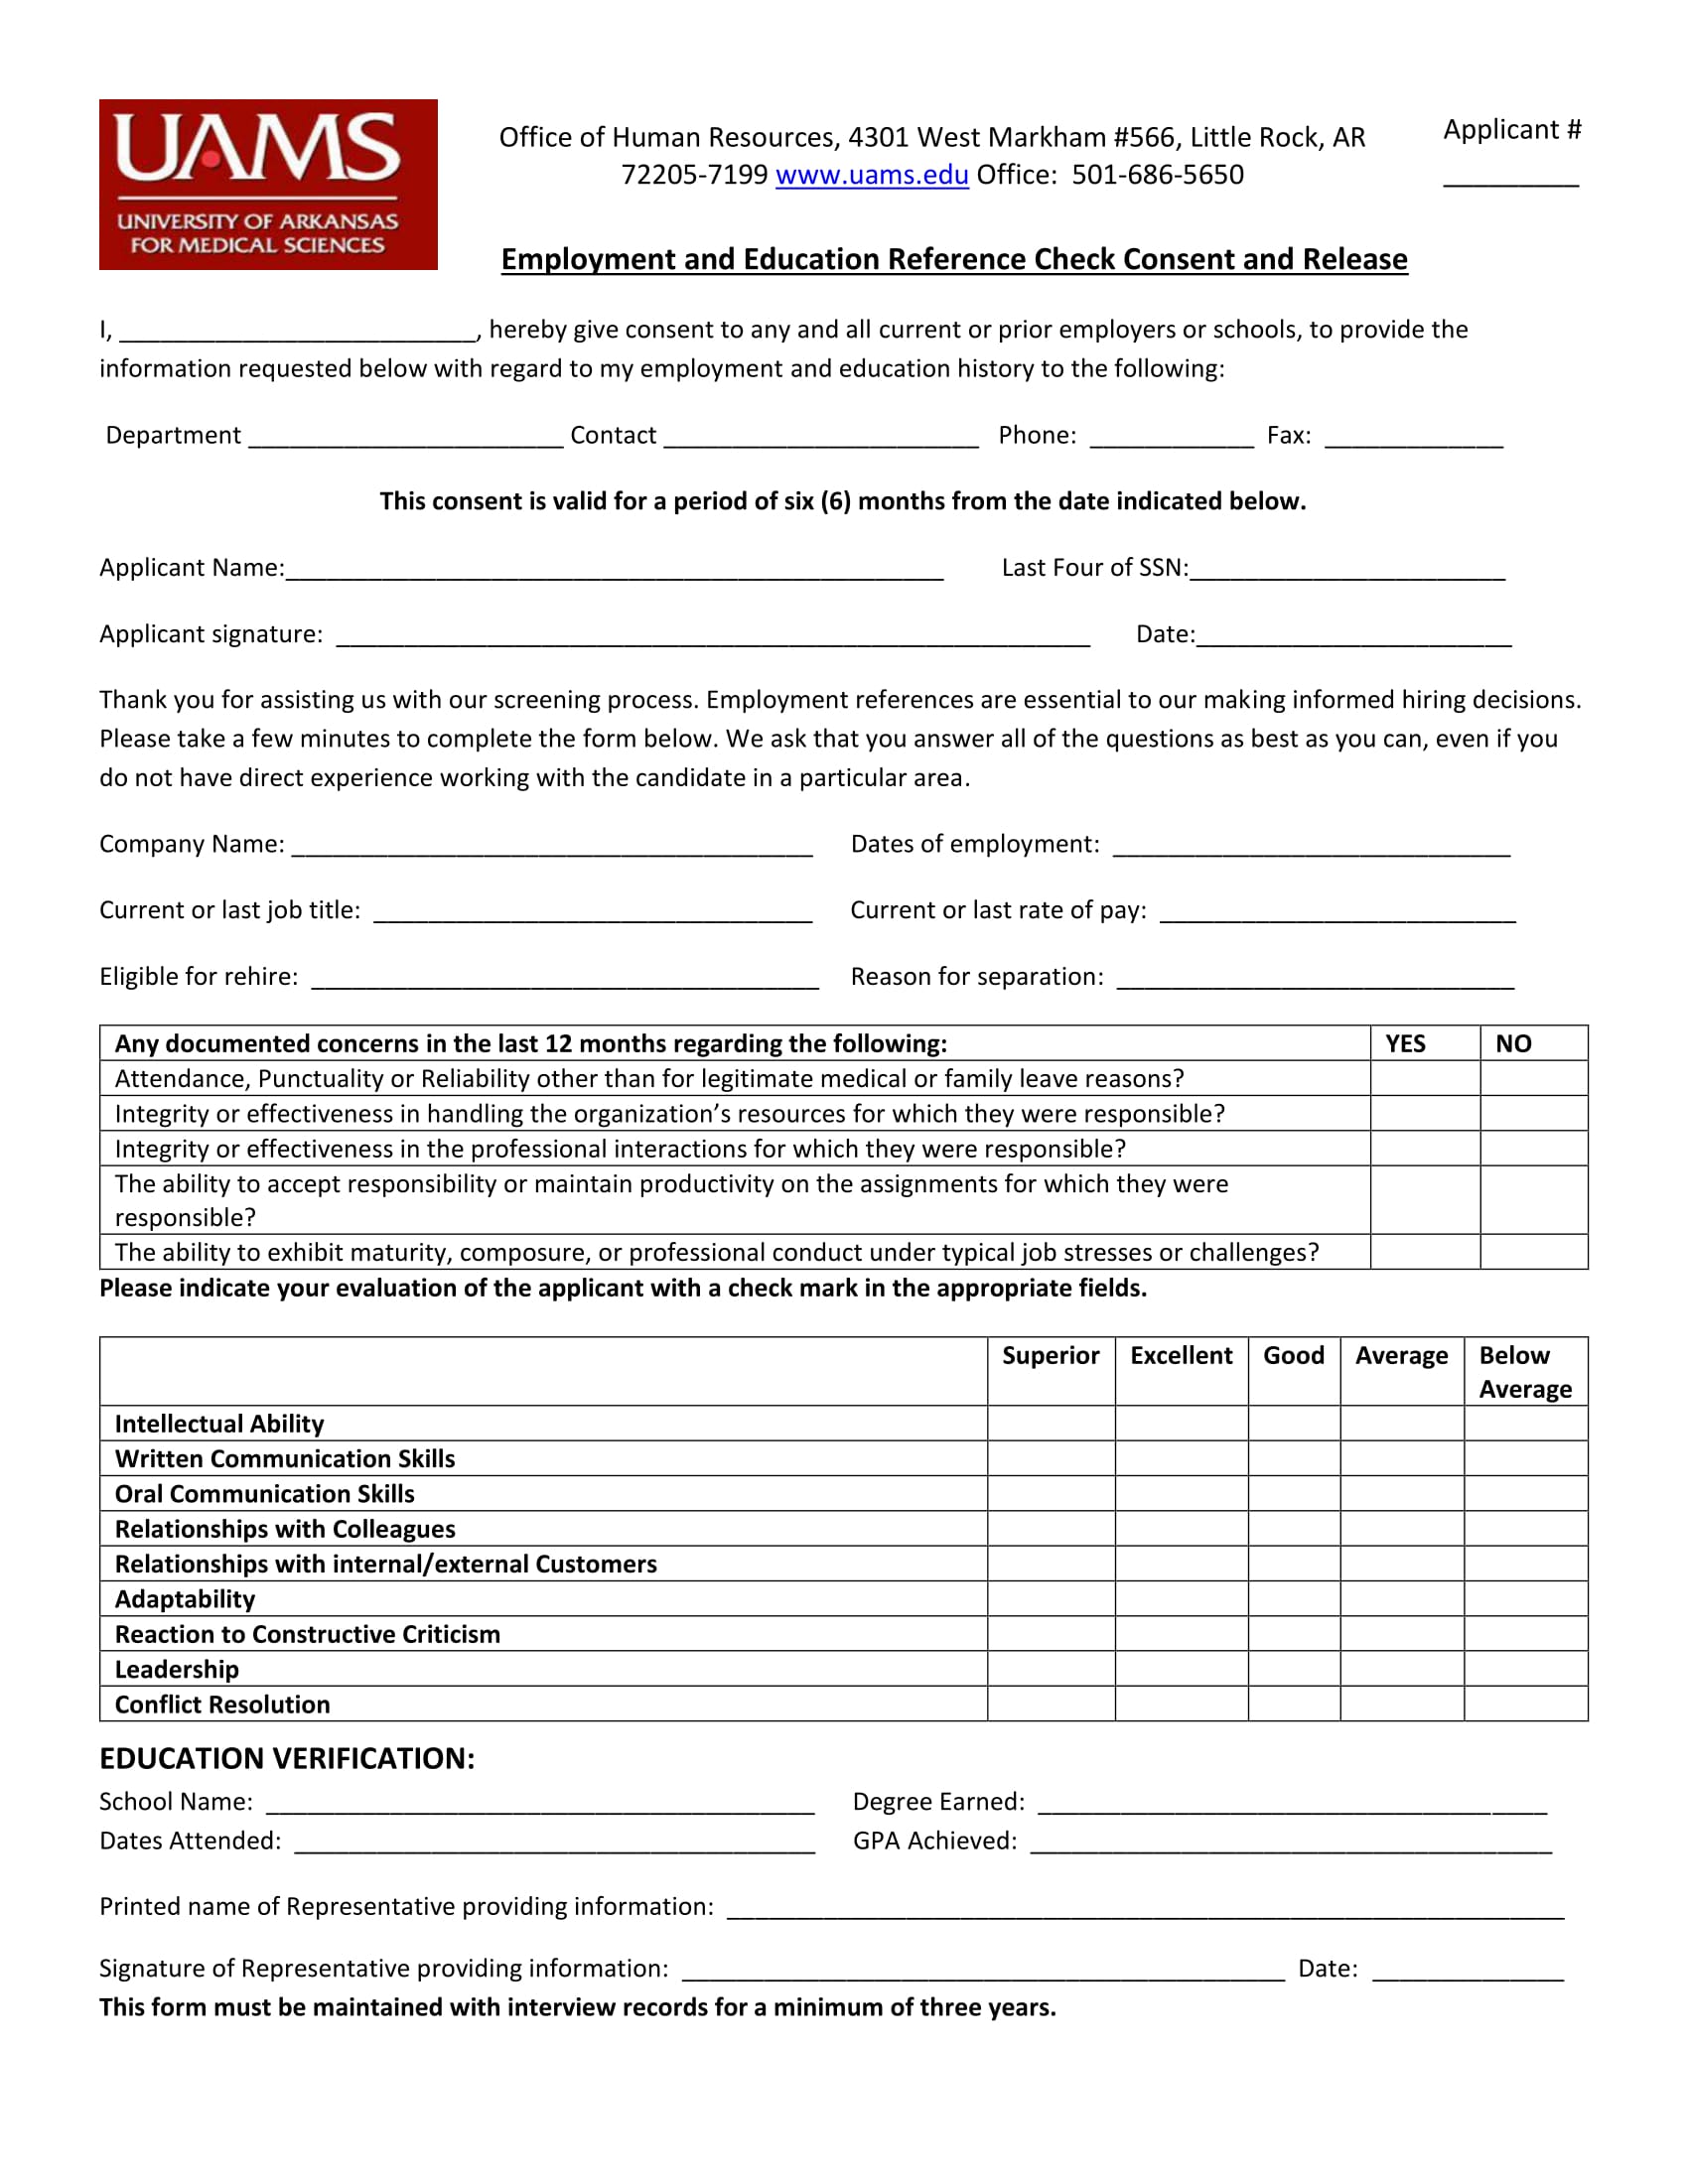 employment and education reference check release form 1